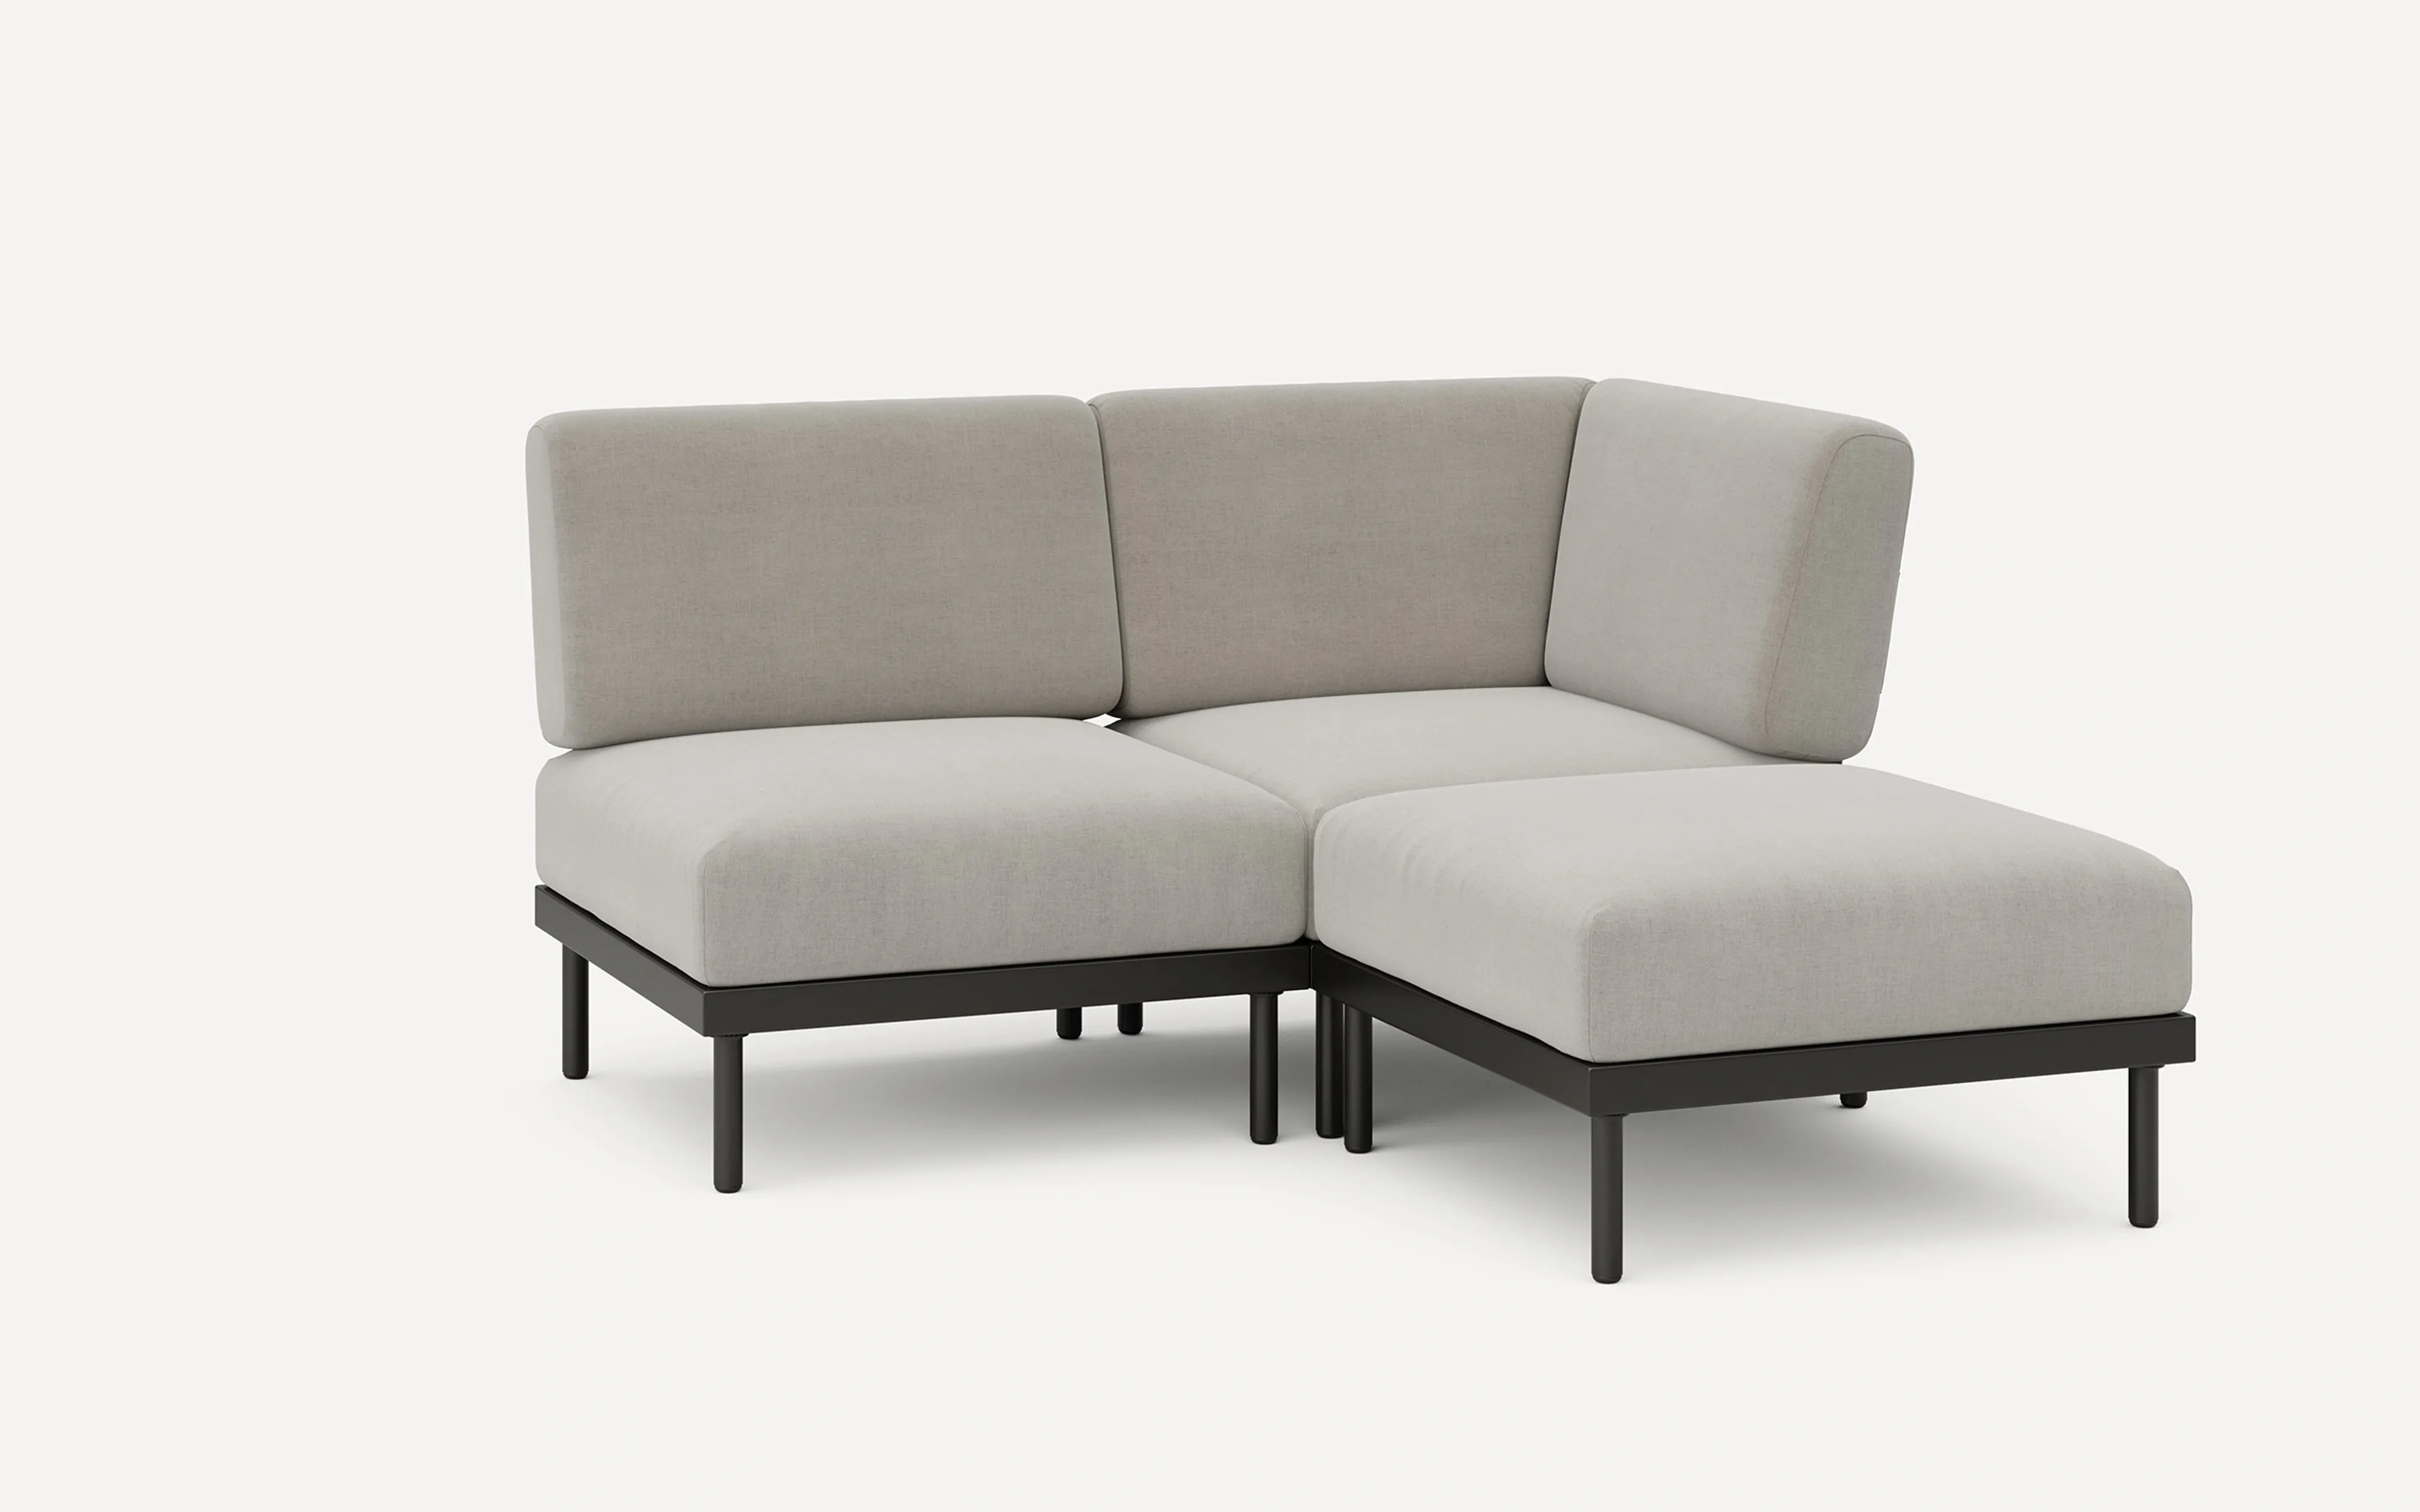 Relay Outdoor 3-Piece Open Sectional